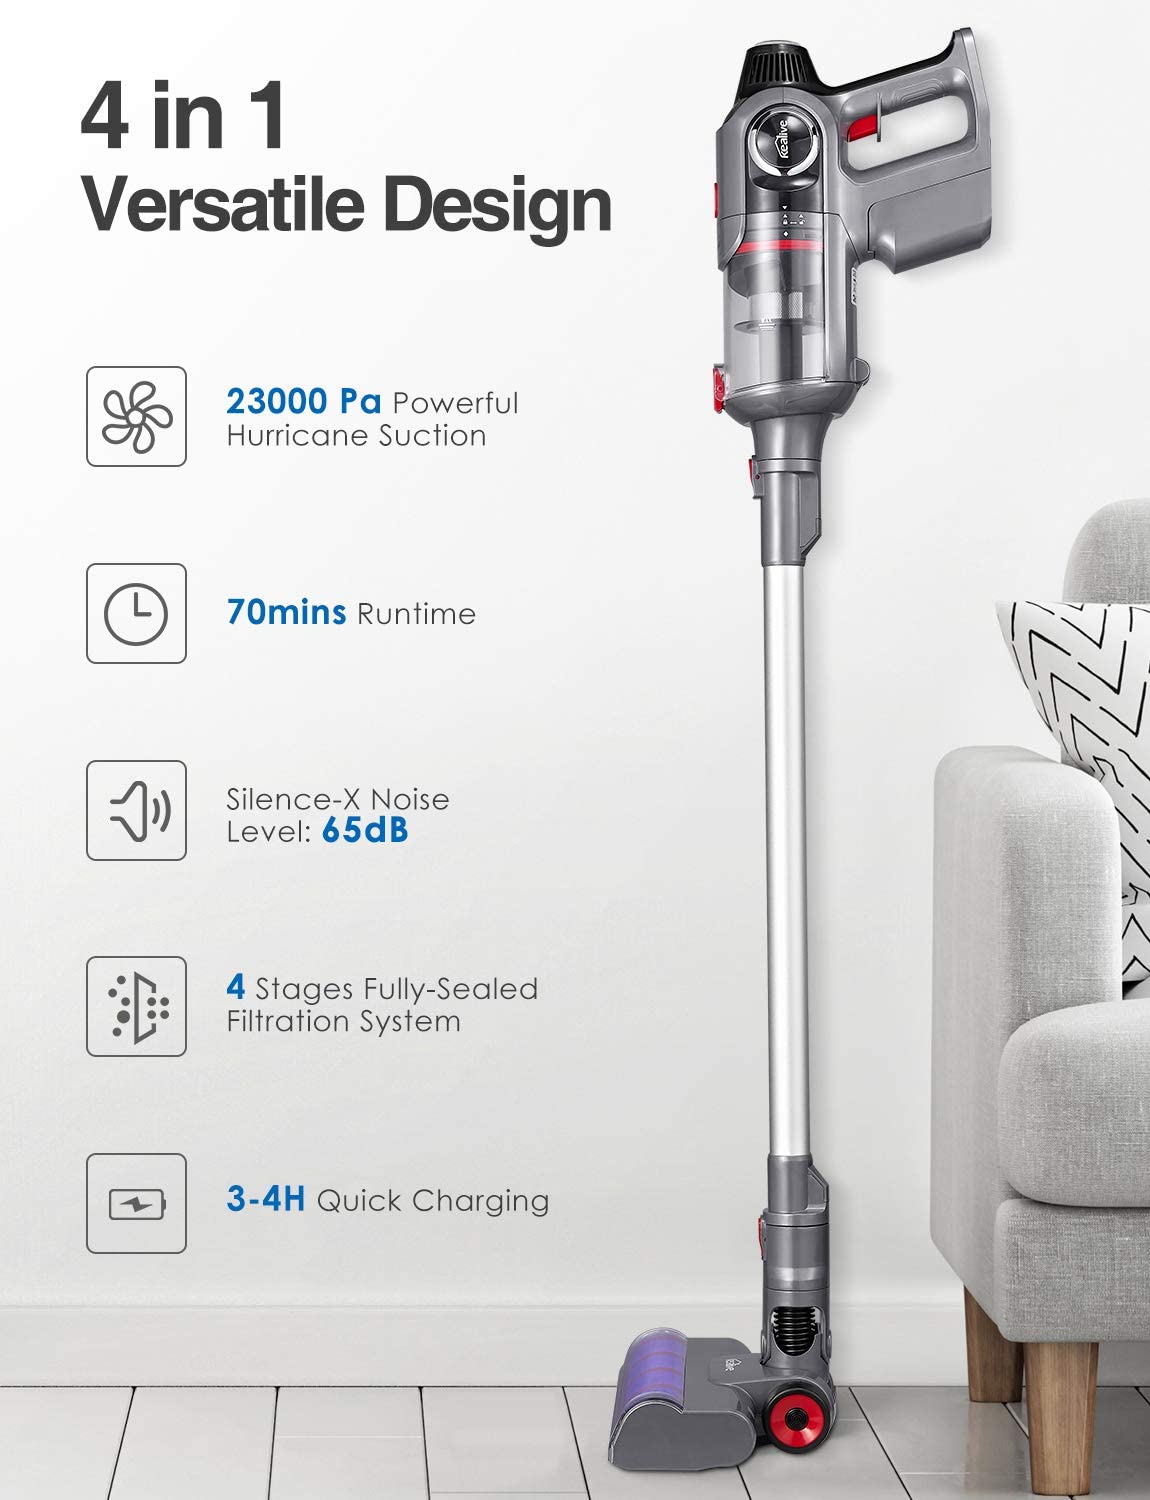 Kealive-Cordless 4 in 1 Vacuum Cleaner,Hard Floor Carpet, Pet Hair Cleaner BVC-V10, house clean, pet hair clean, quick charge 